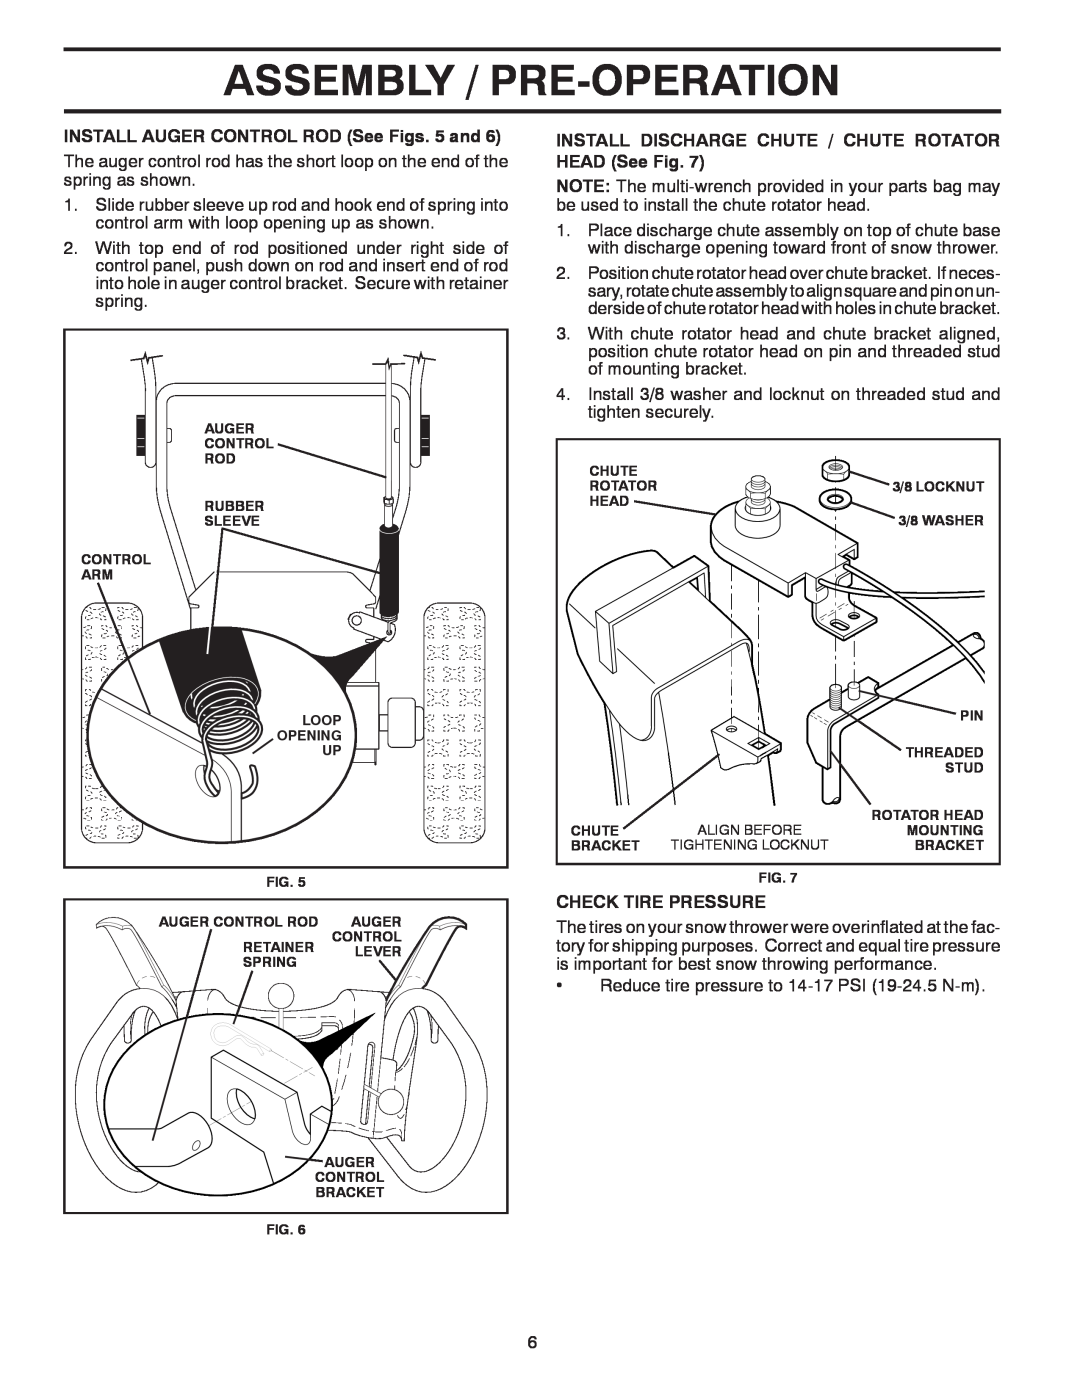 Poulan 96194000504 owner manual Assembly / Pre-Operation, INSTALL AUGER CONTROL ROD See Figs. 5 and, Check Tire Pressure 